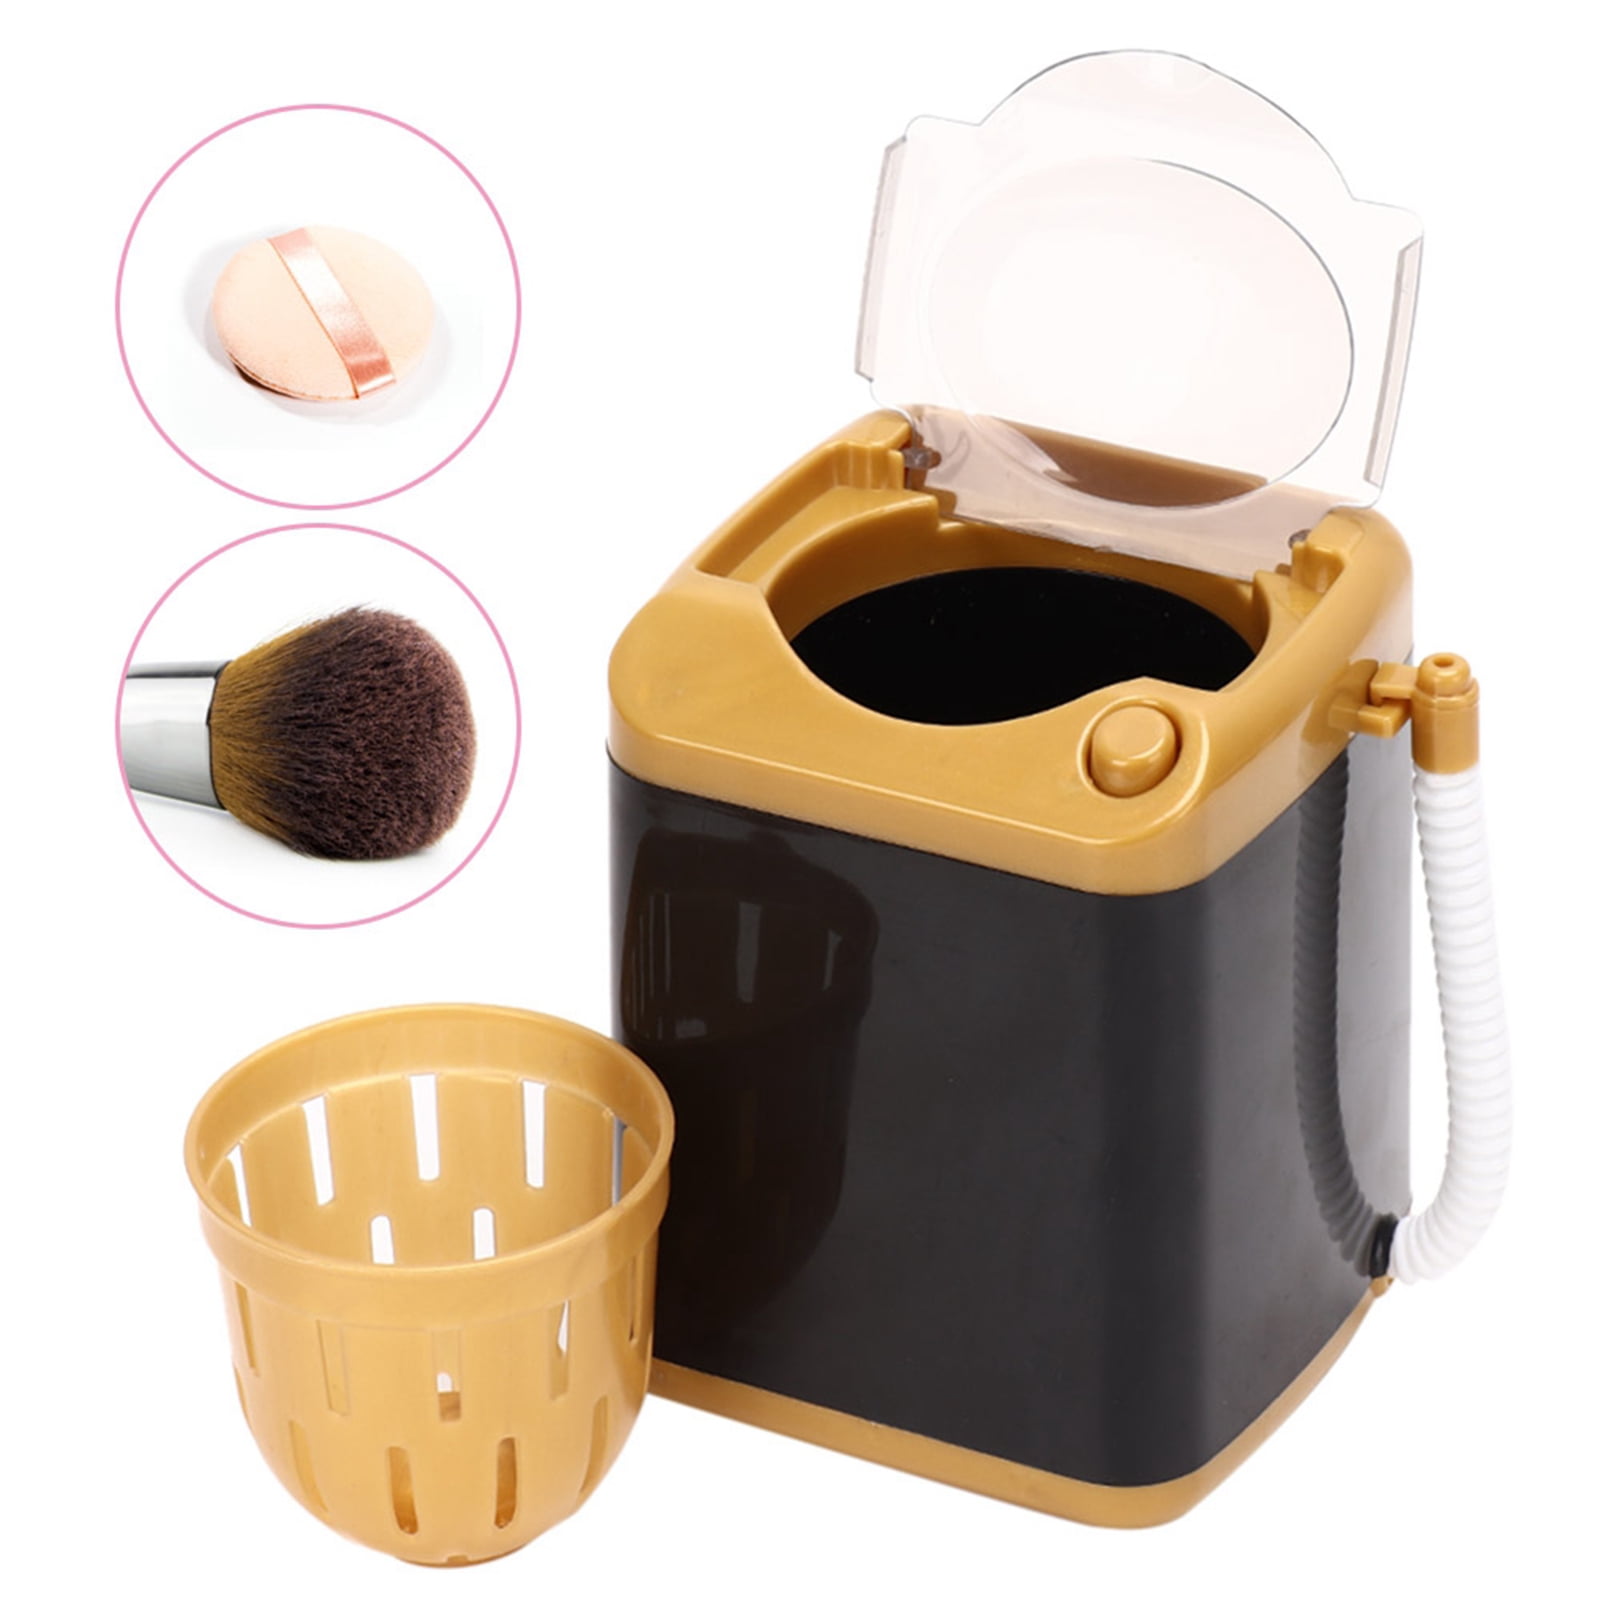 Plutput Makeup Brush Cleaner Machine Electric Makeup Brush Wash Machine For  All Size Brushes Automatic Cosmetic Brush Clean Tool White Pink 